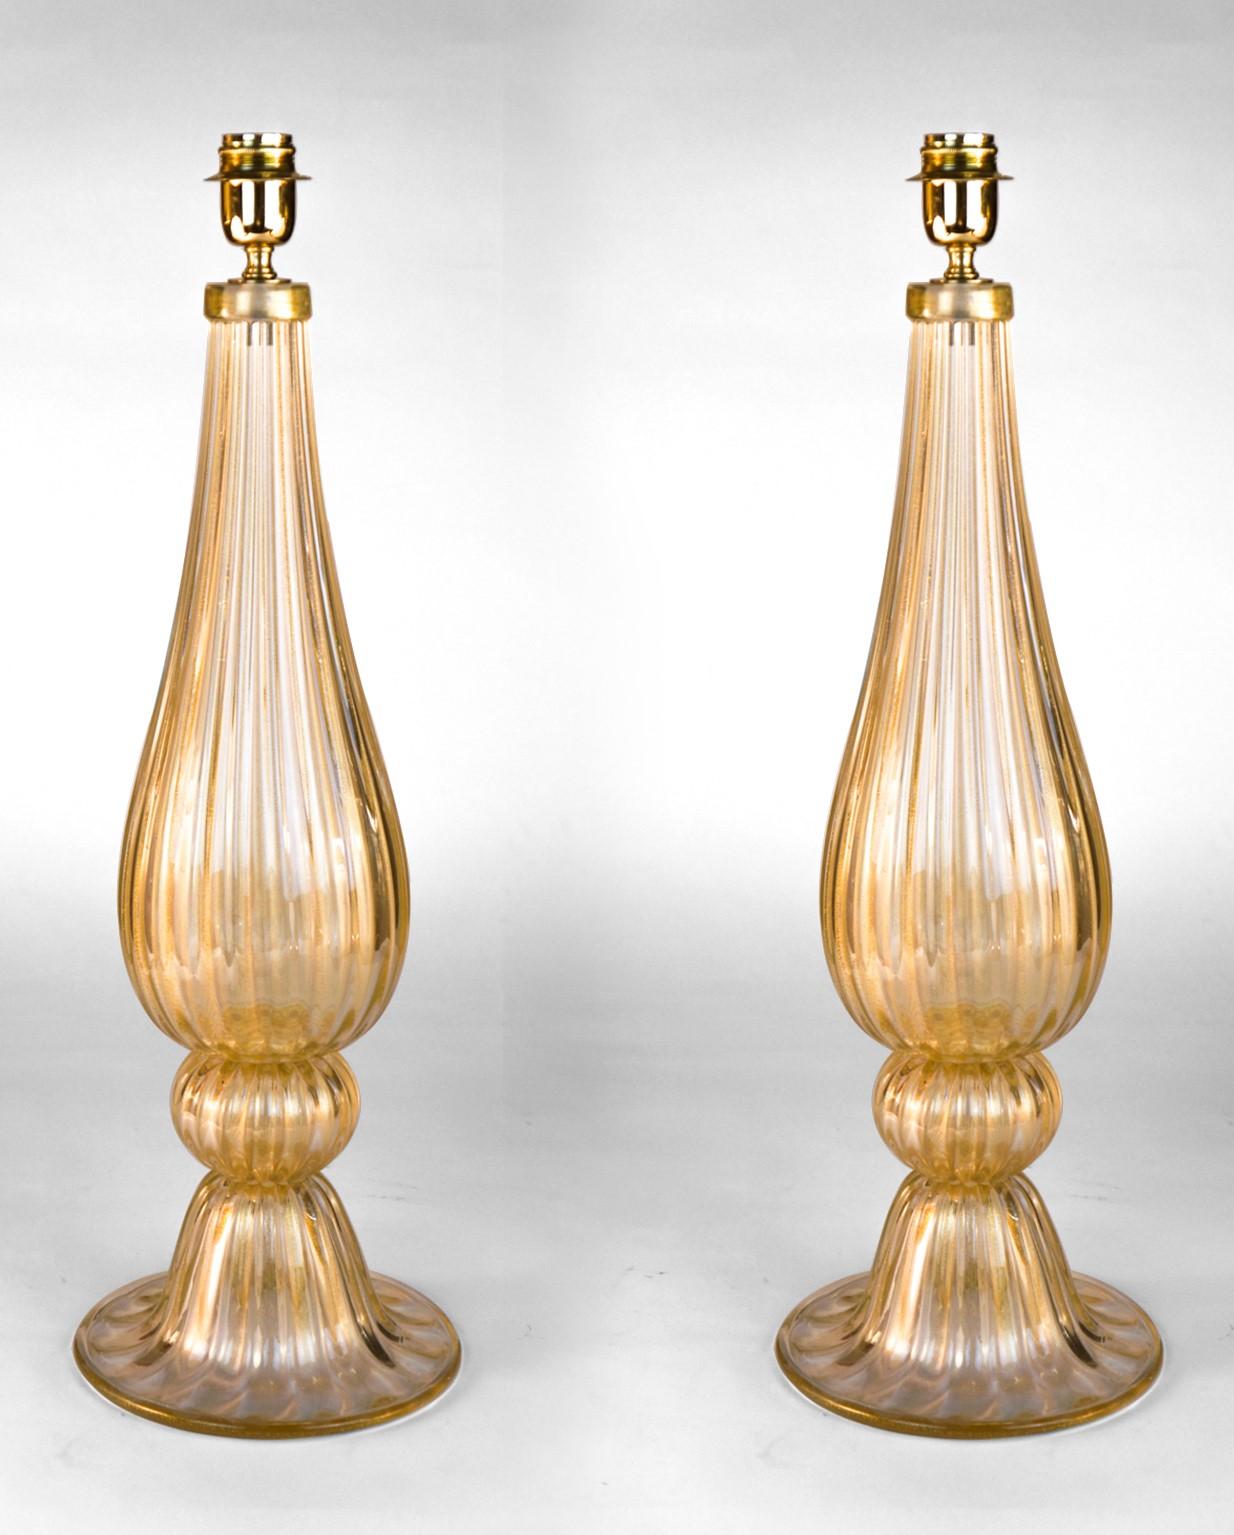 Exclusive pair of Murano glass table lamps in crystal color in gold leaf 24 carats. 
By touching the lamps, you can hear the various grooves made especially by the 